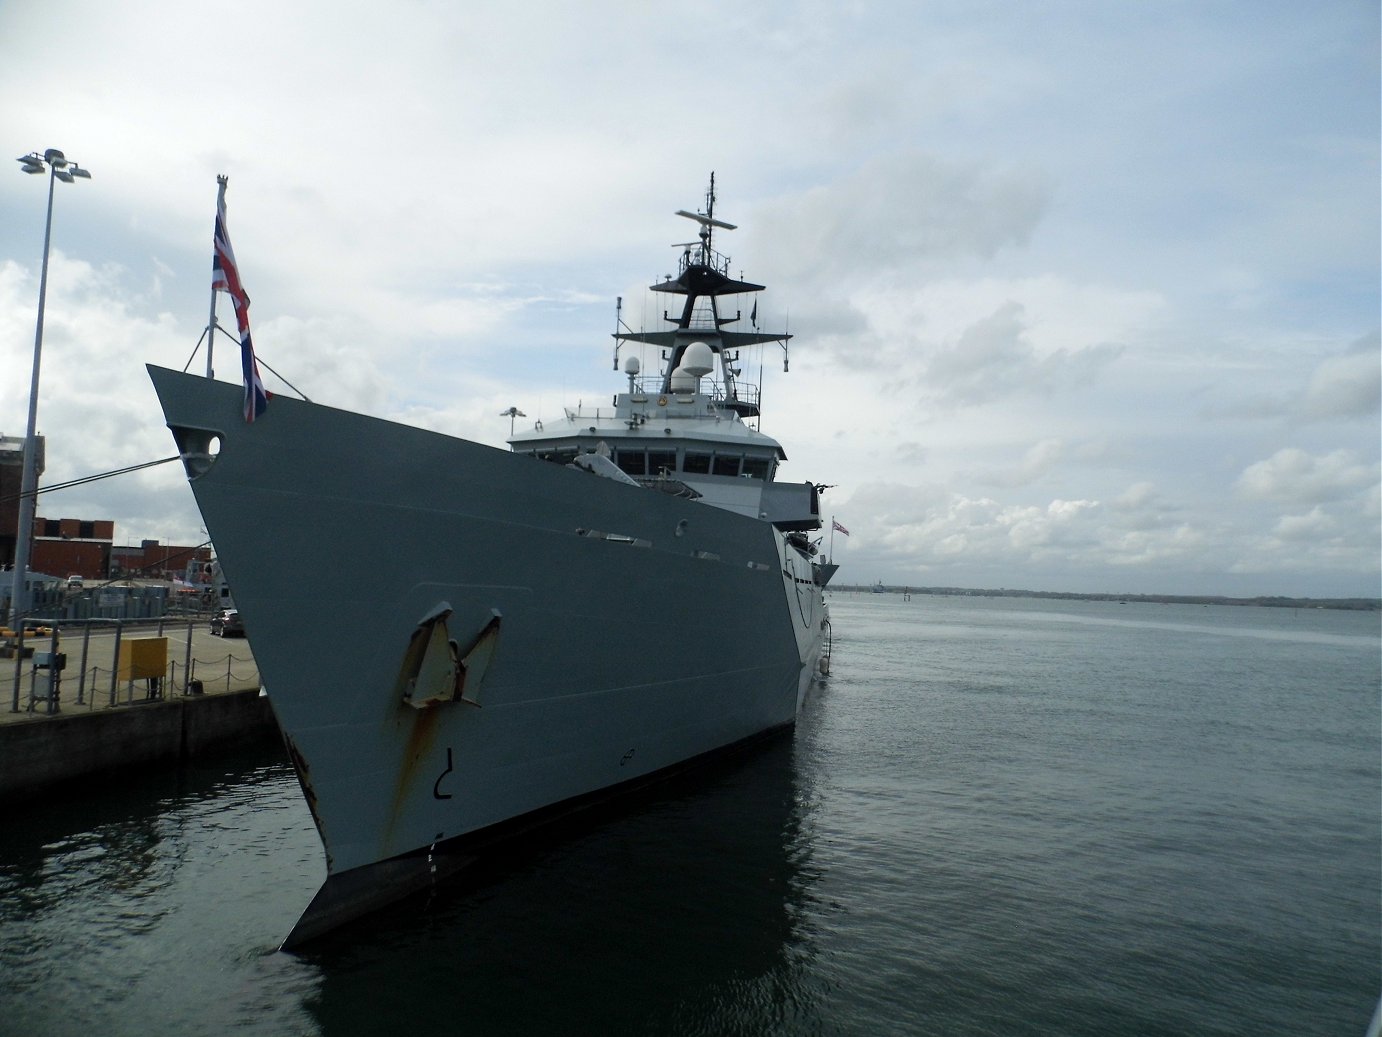 River class offshore patrol vessel H.M.S. Mersey at Portsmouth Naval Base 23 April 2019